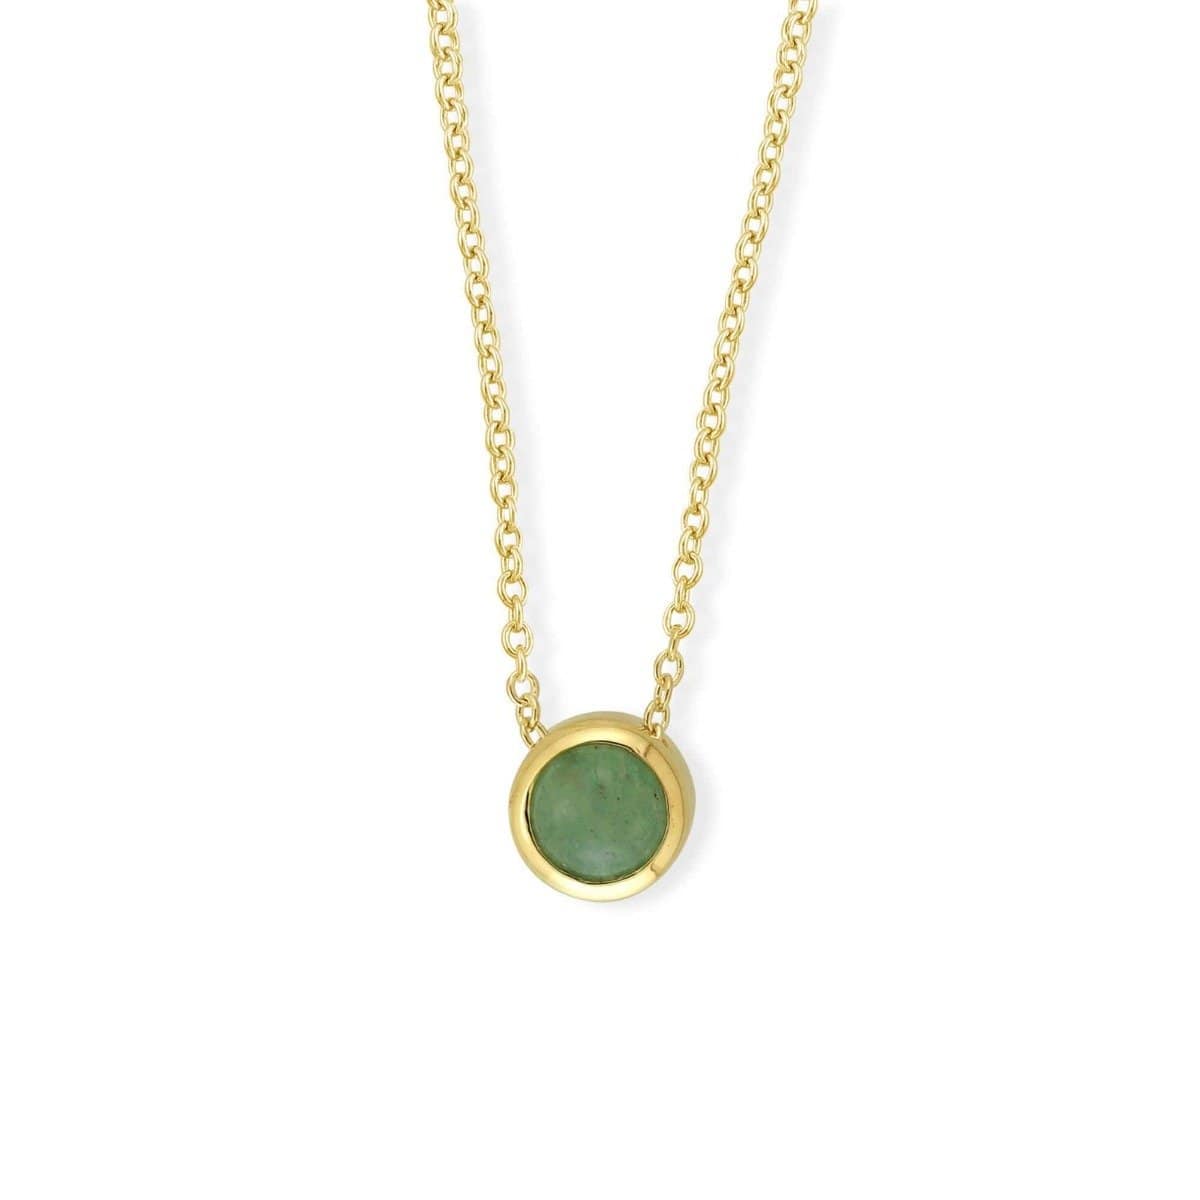 Boma Jewelry Necklaces 14K Gold Plated Treasured Bezel Pendant Necklace